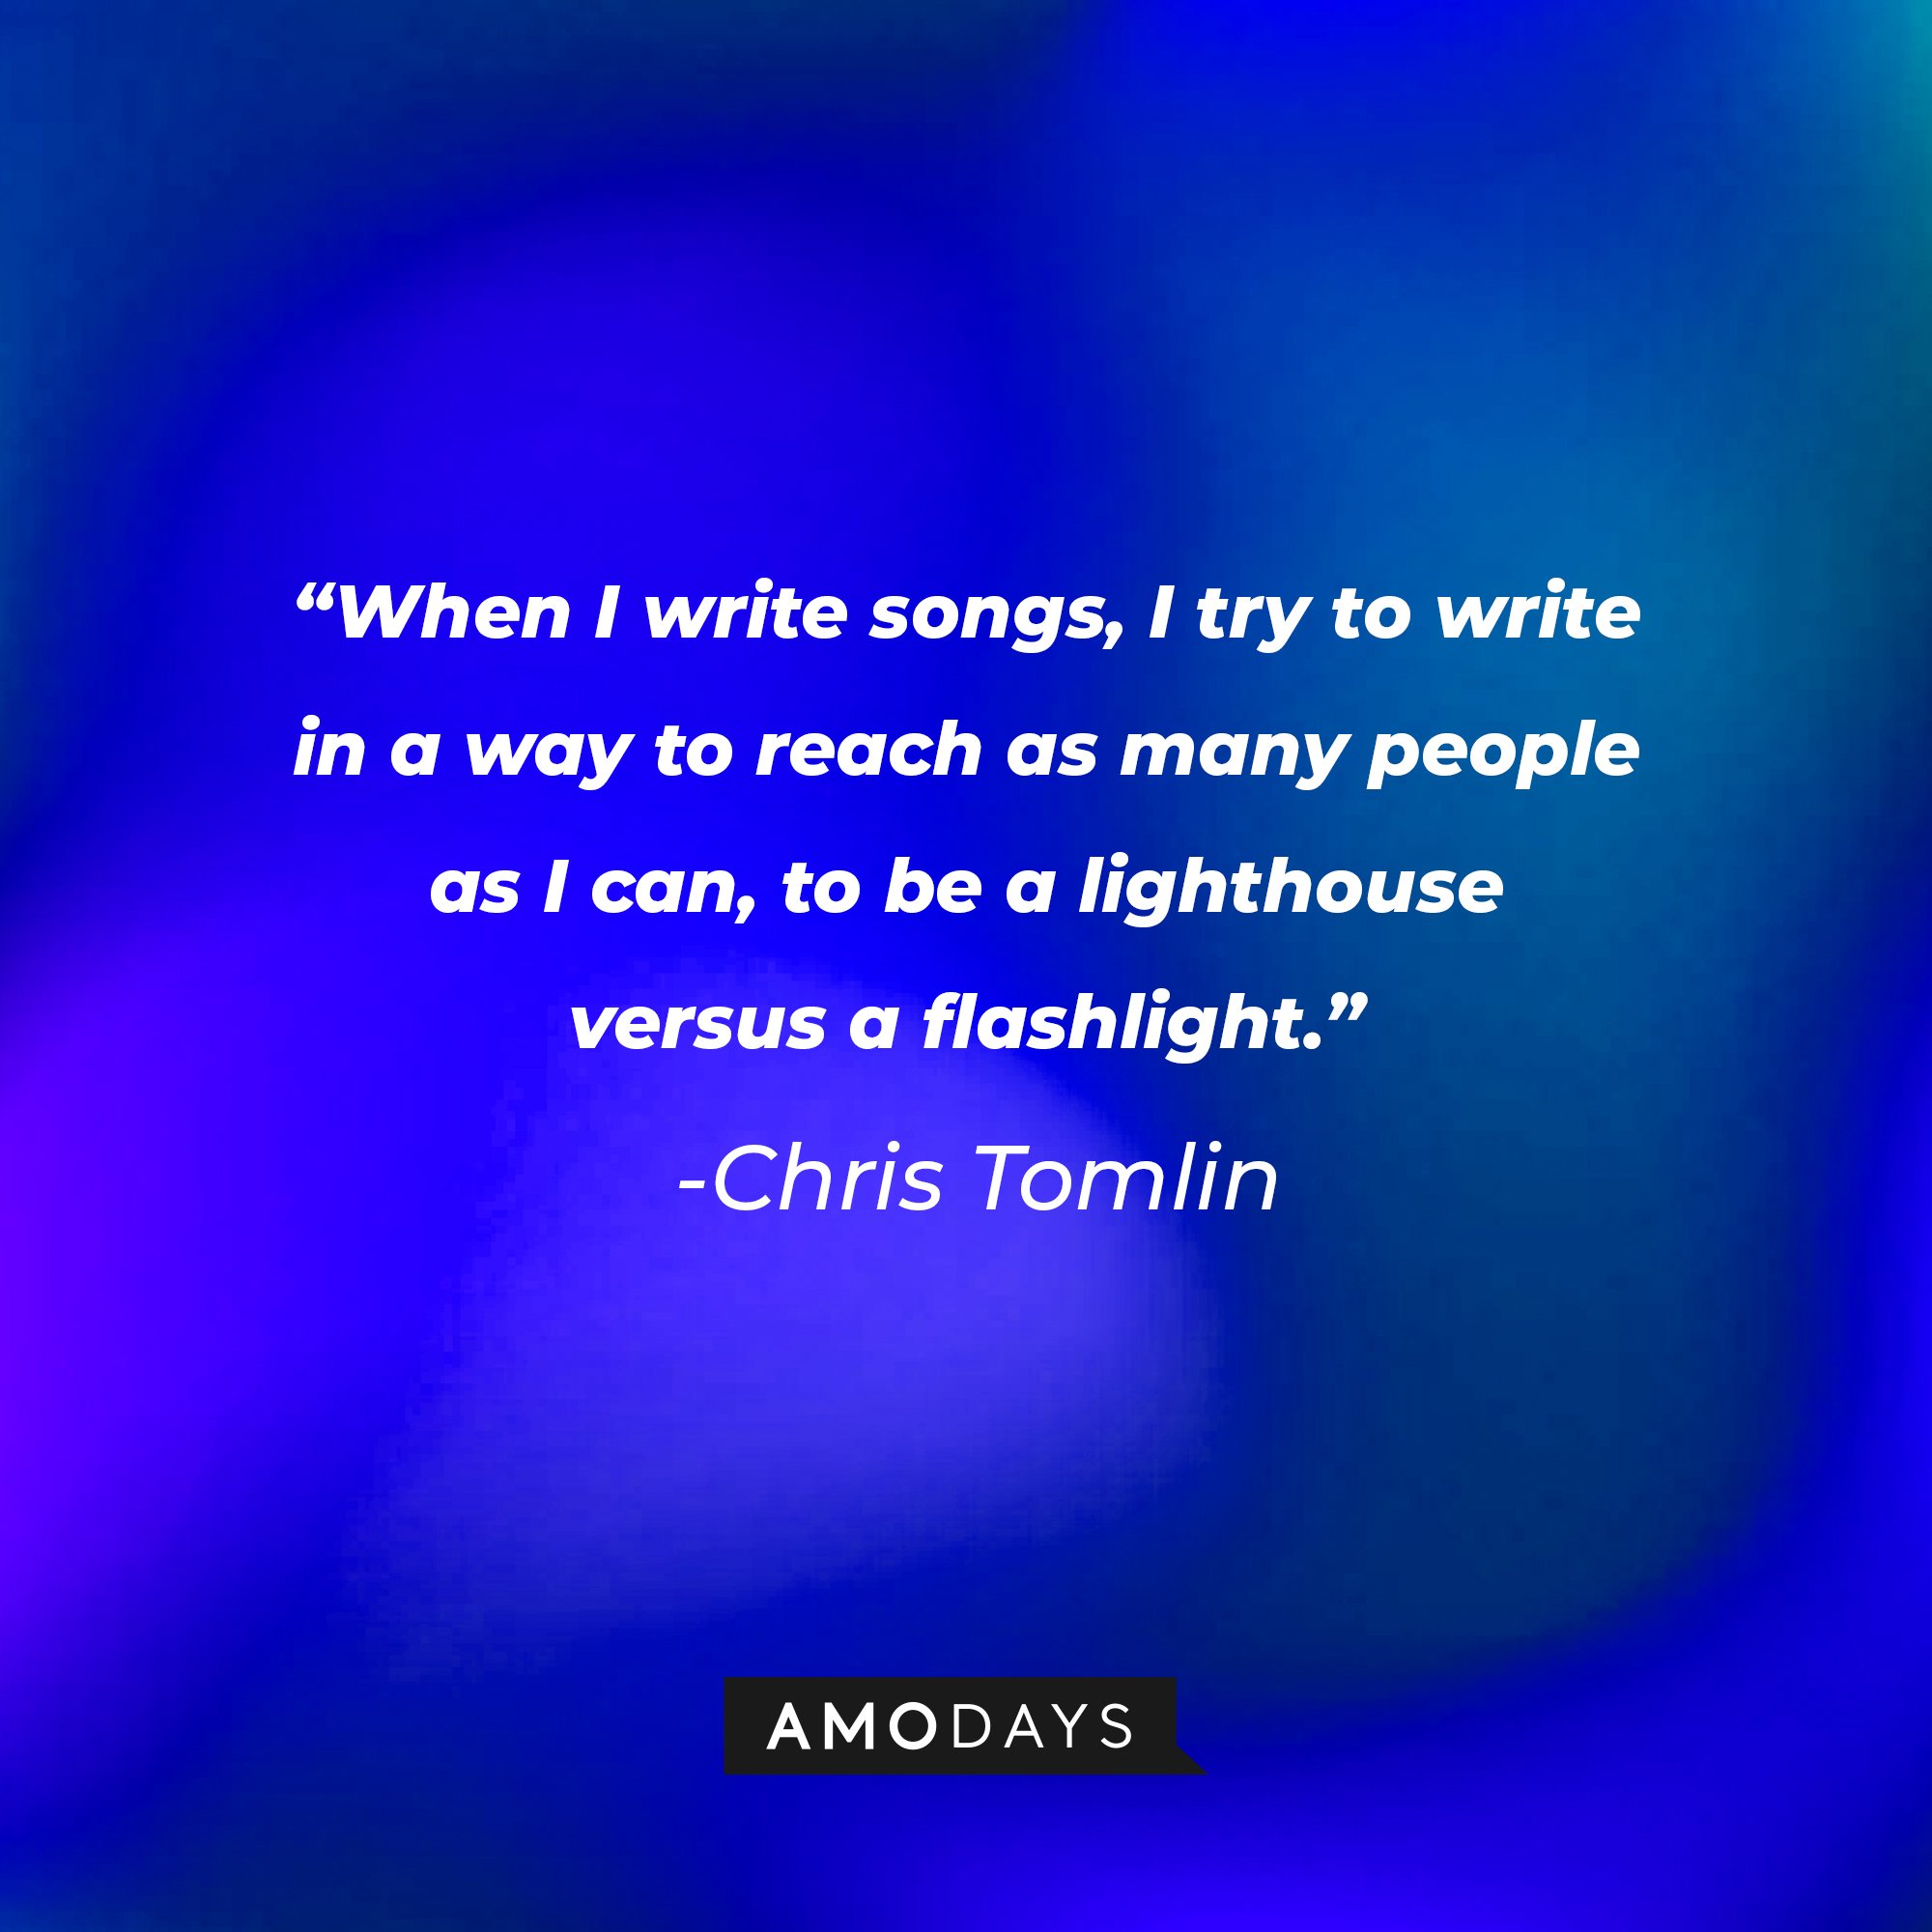 Chris Tomlin’s quote: “When I write songs, I try to write in a way to reach as many people as I can, to be a lighthouse versus a flashlight.” | Image: AmoDays